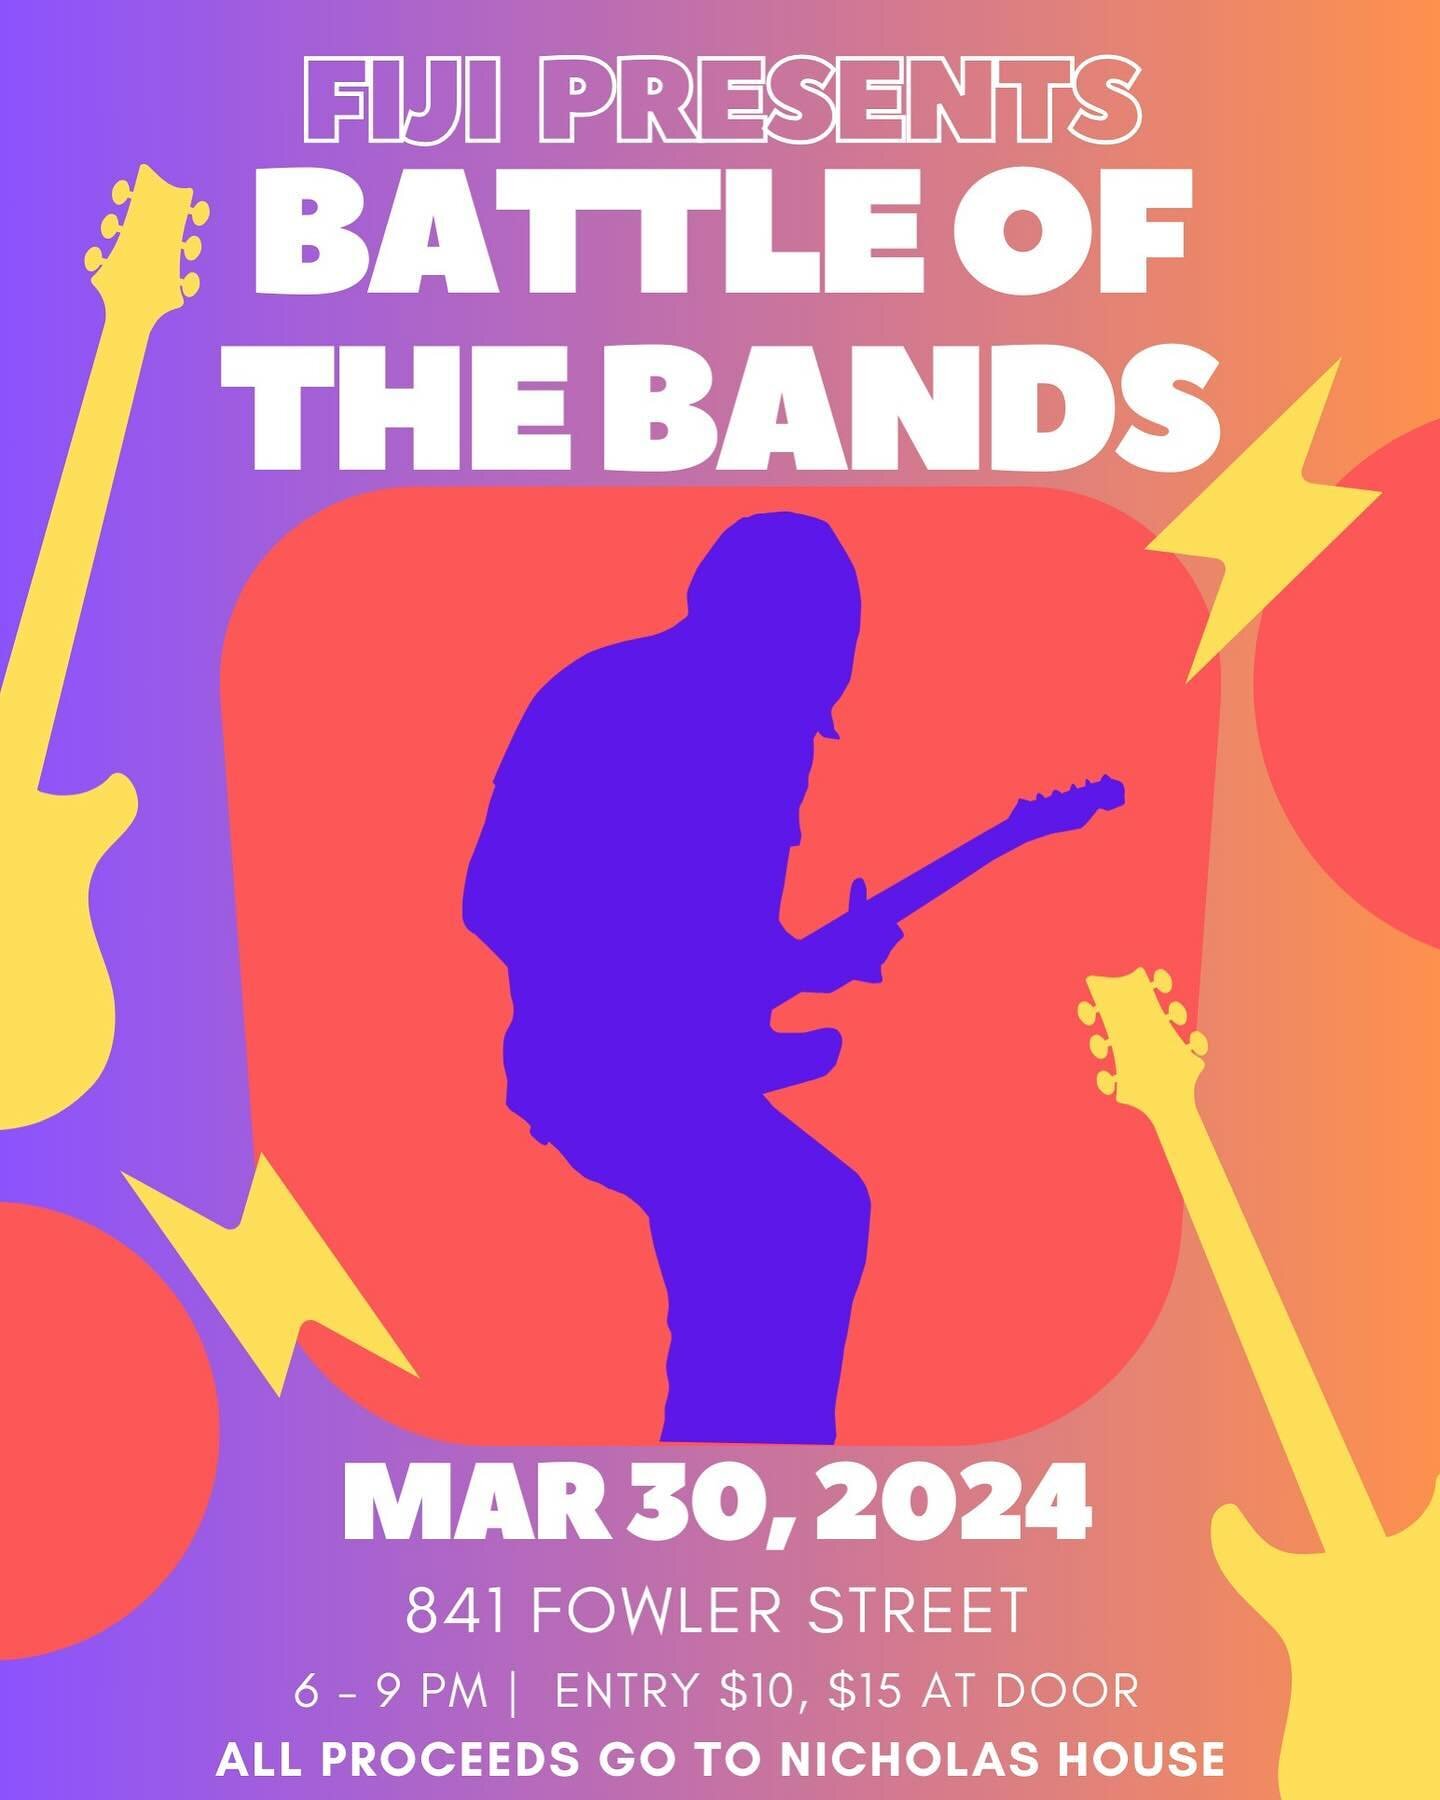 Fiji Philanthropy is hosting our 3rd Battle of the Bands on March 30th, 6-9 pm at the house❗️Purchase tickets for $10 through the link in bio&nbsp;or pay $15 at the door 🎟️ Come enjoy some live music and good food 🎸

All proceeds go to Nicholas Hou